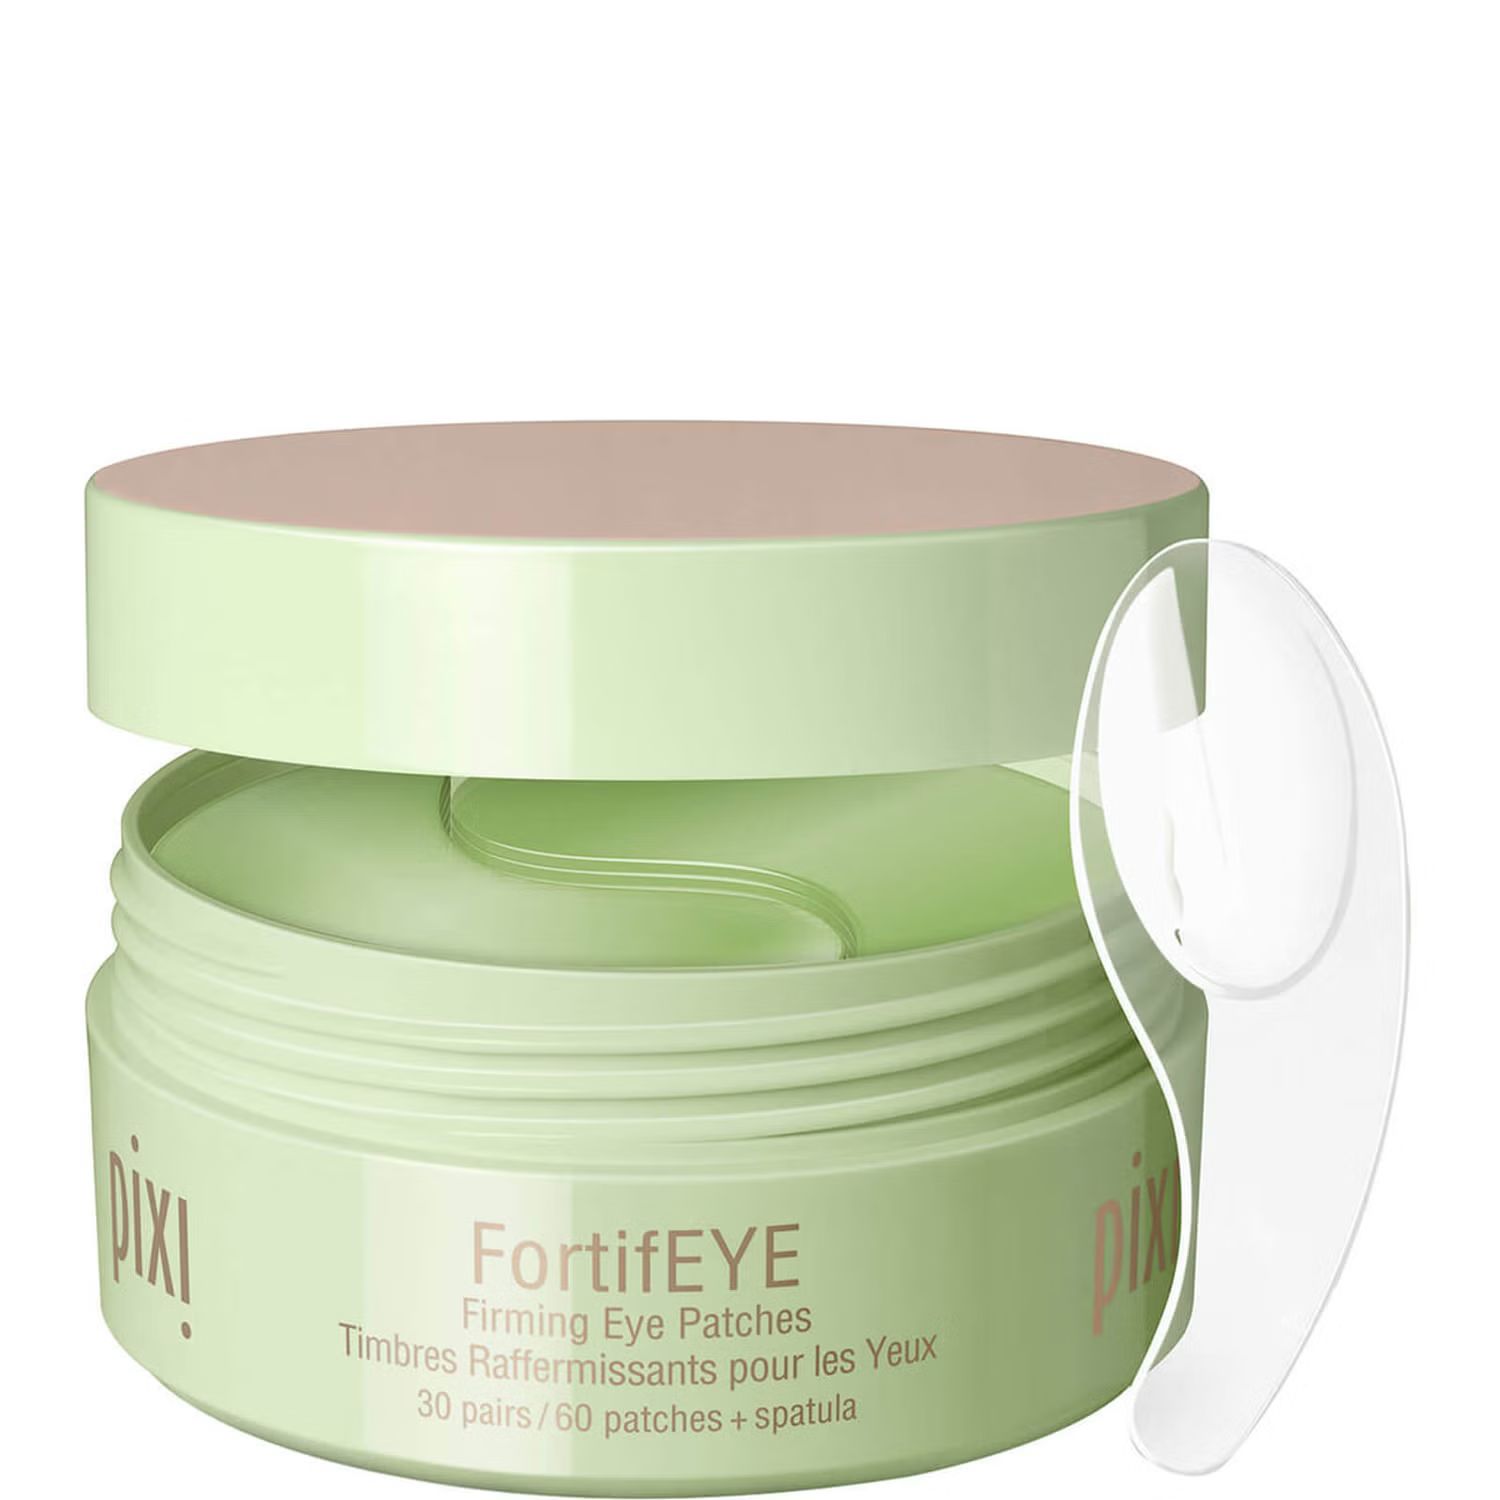 Awaken and revitalise tired eyes with PIXI FortifEYE Eye Patches, a selection of hydrogel eye pat... | Look Fantastic (ROW)